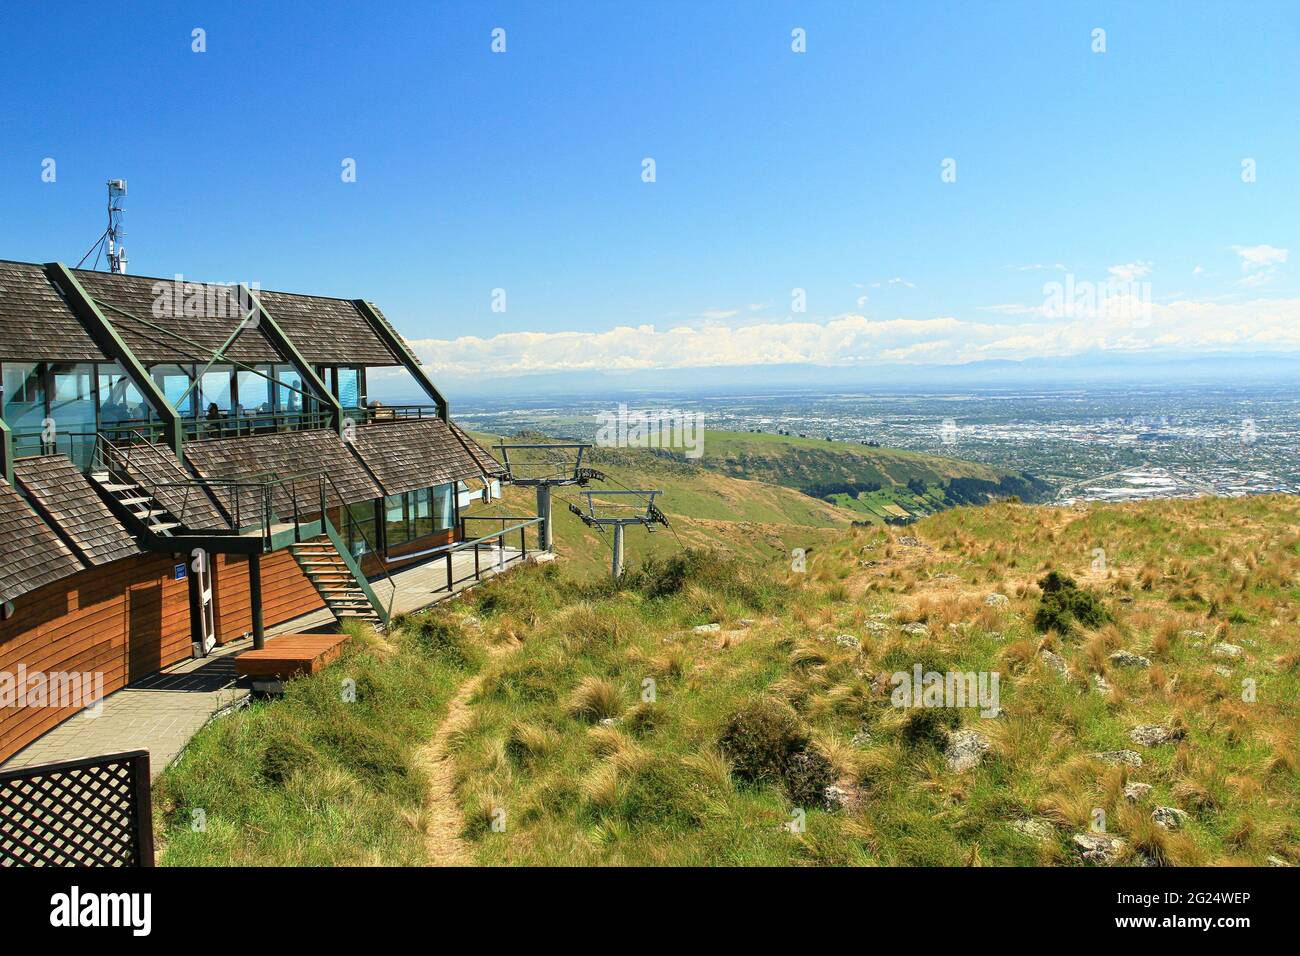 View of Christchurch Gondola The Summit Station where the base is located in Heathcote Valley, and it traverses the slopes of Mount Cavendish in the P Stock Photo